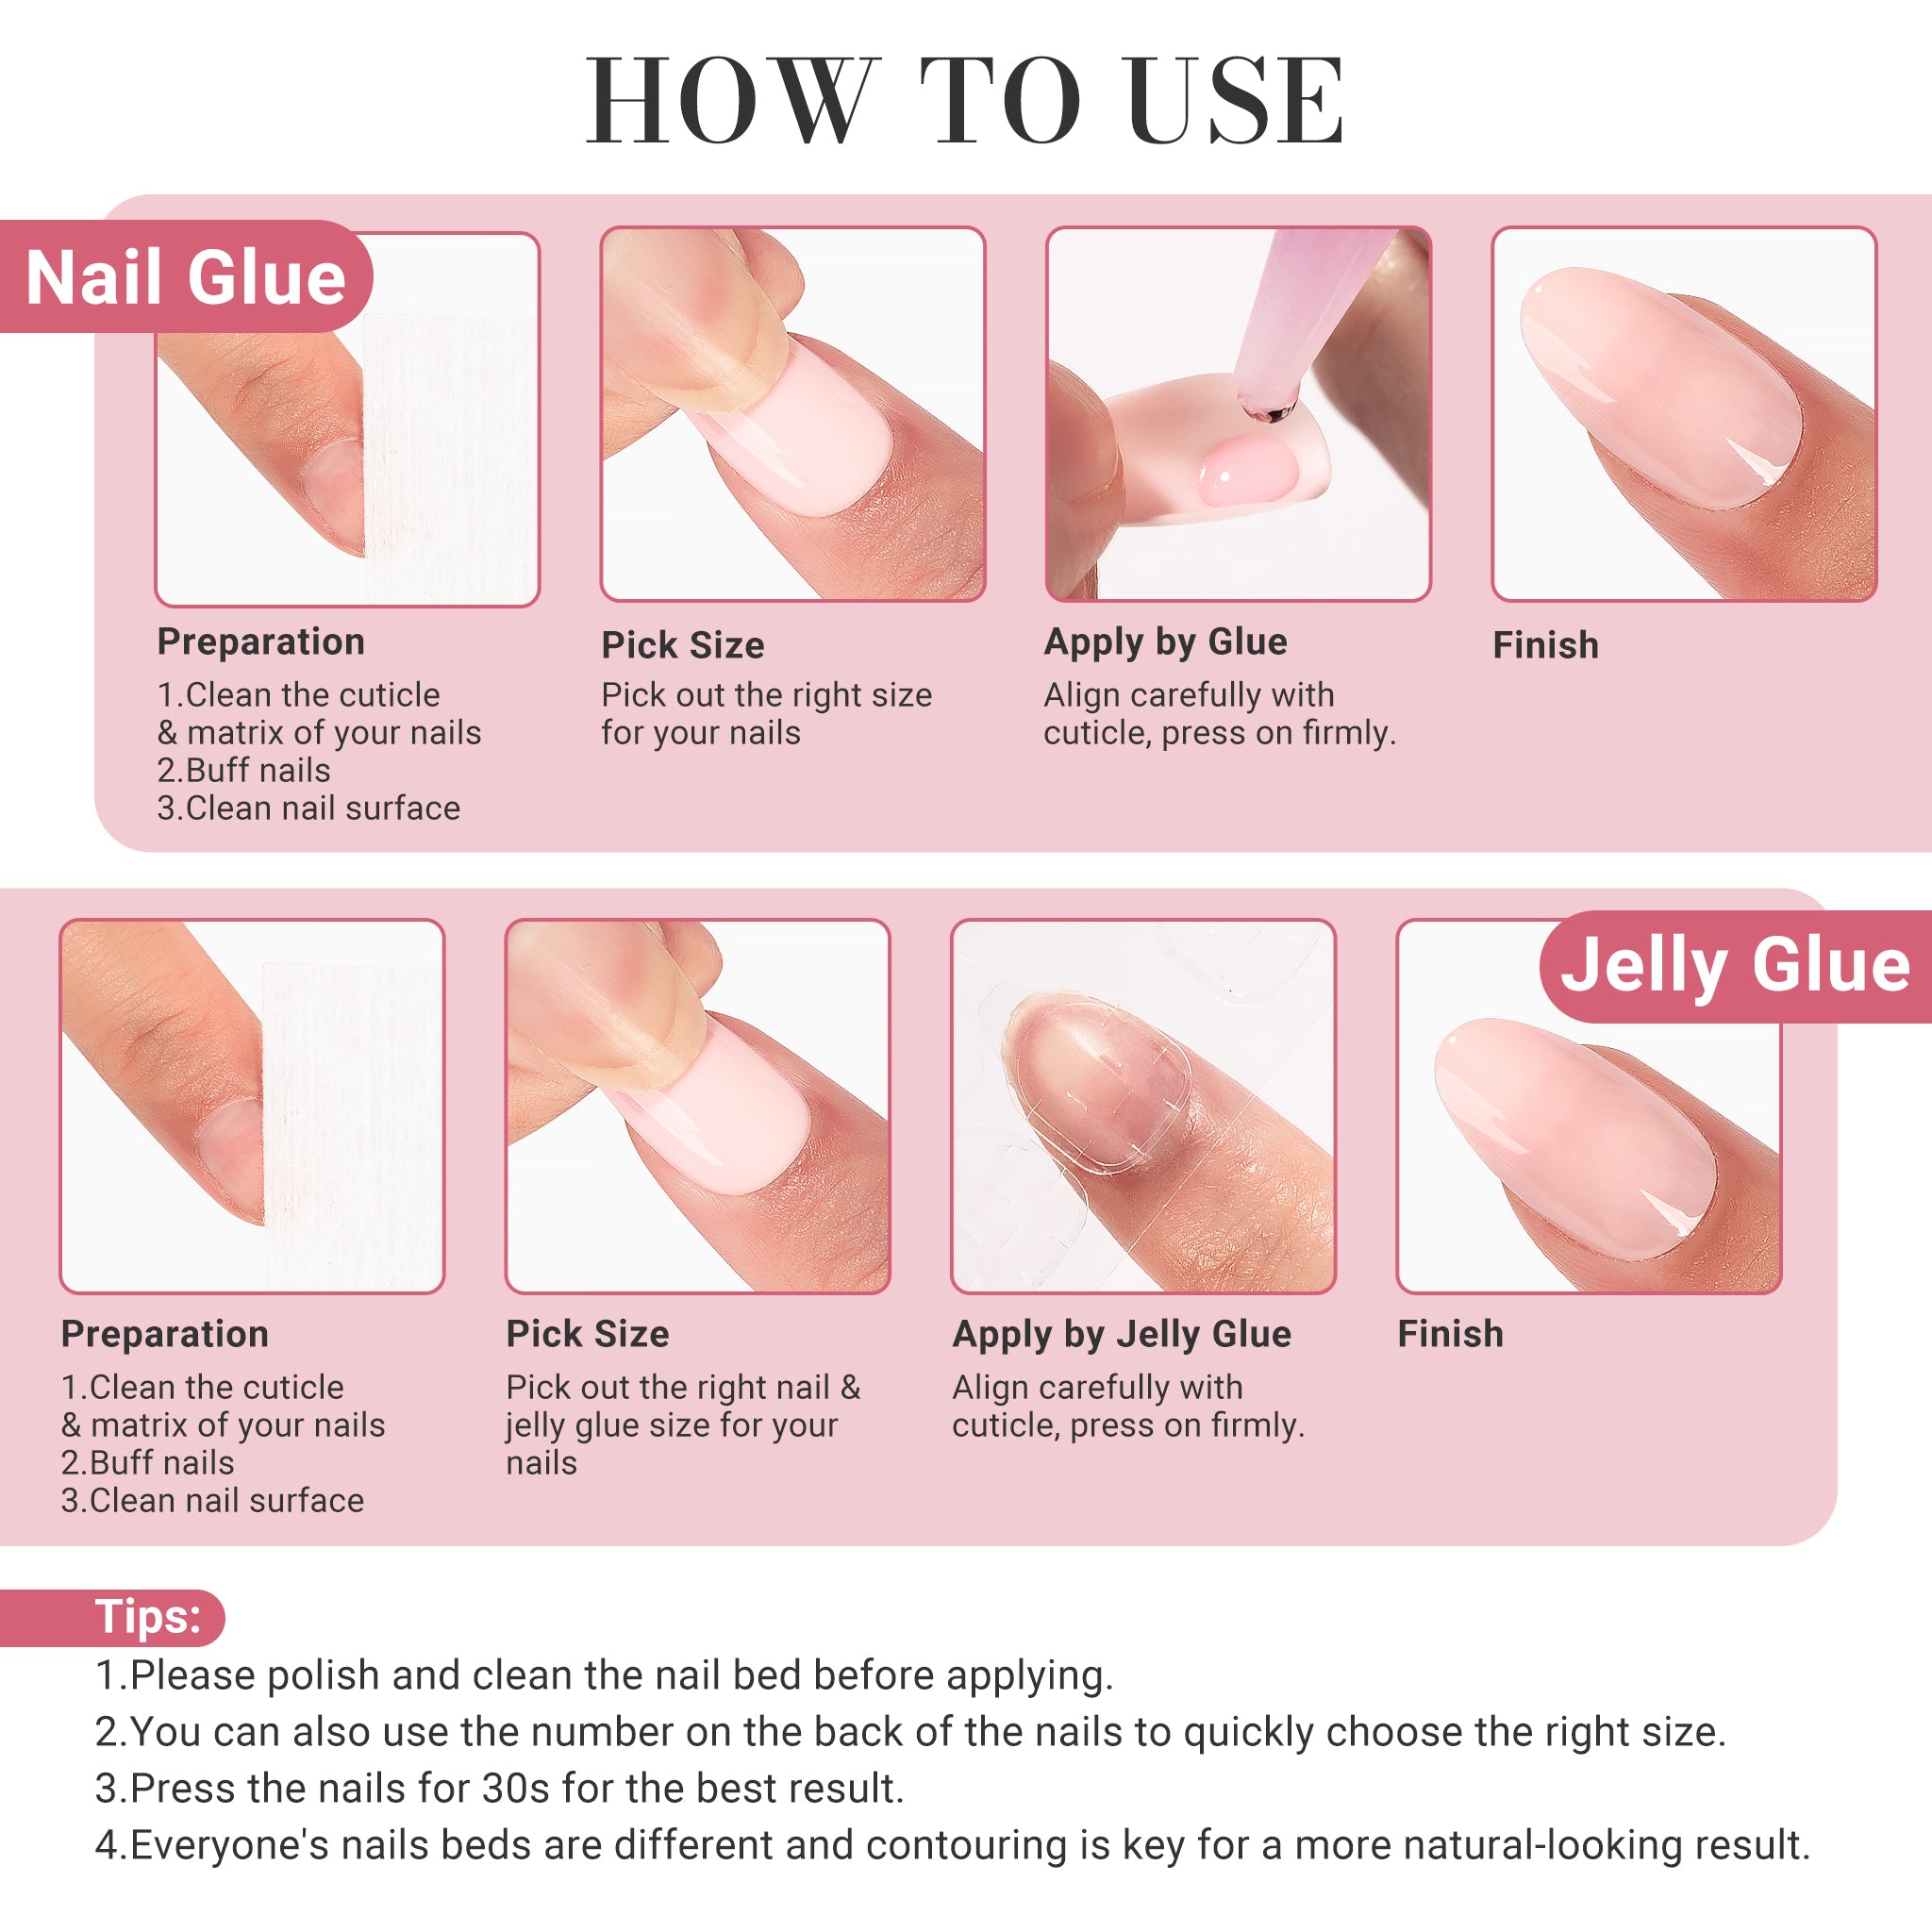 How To Use Handmade Press-on Nails